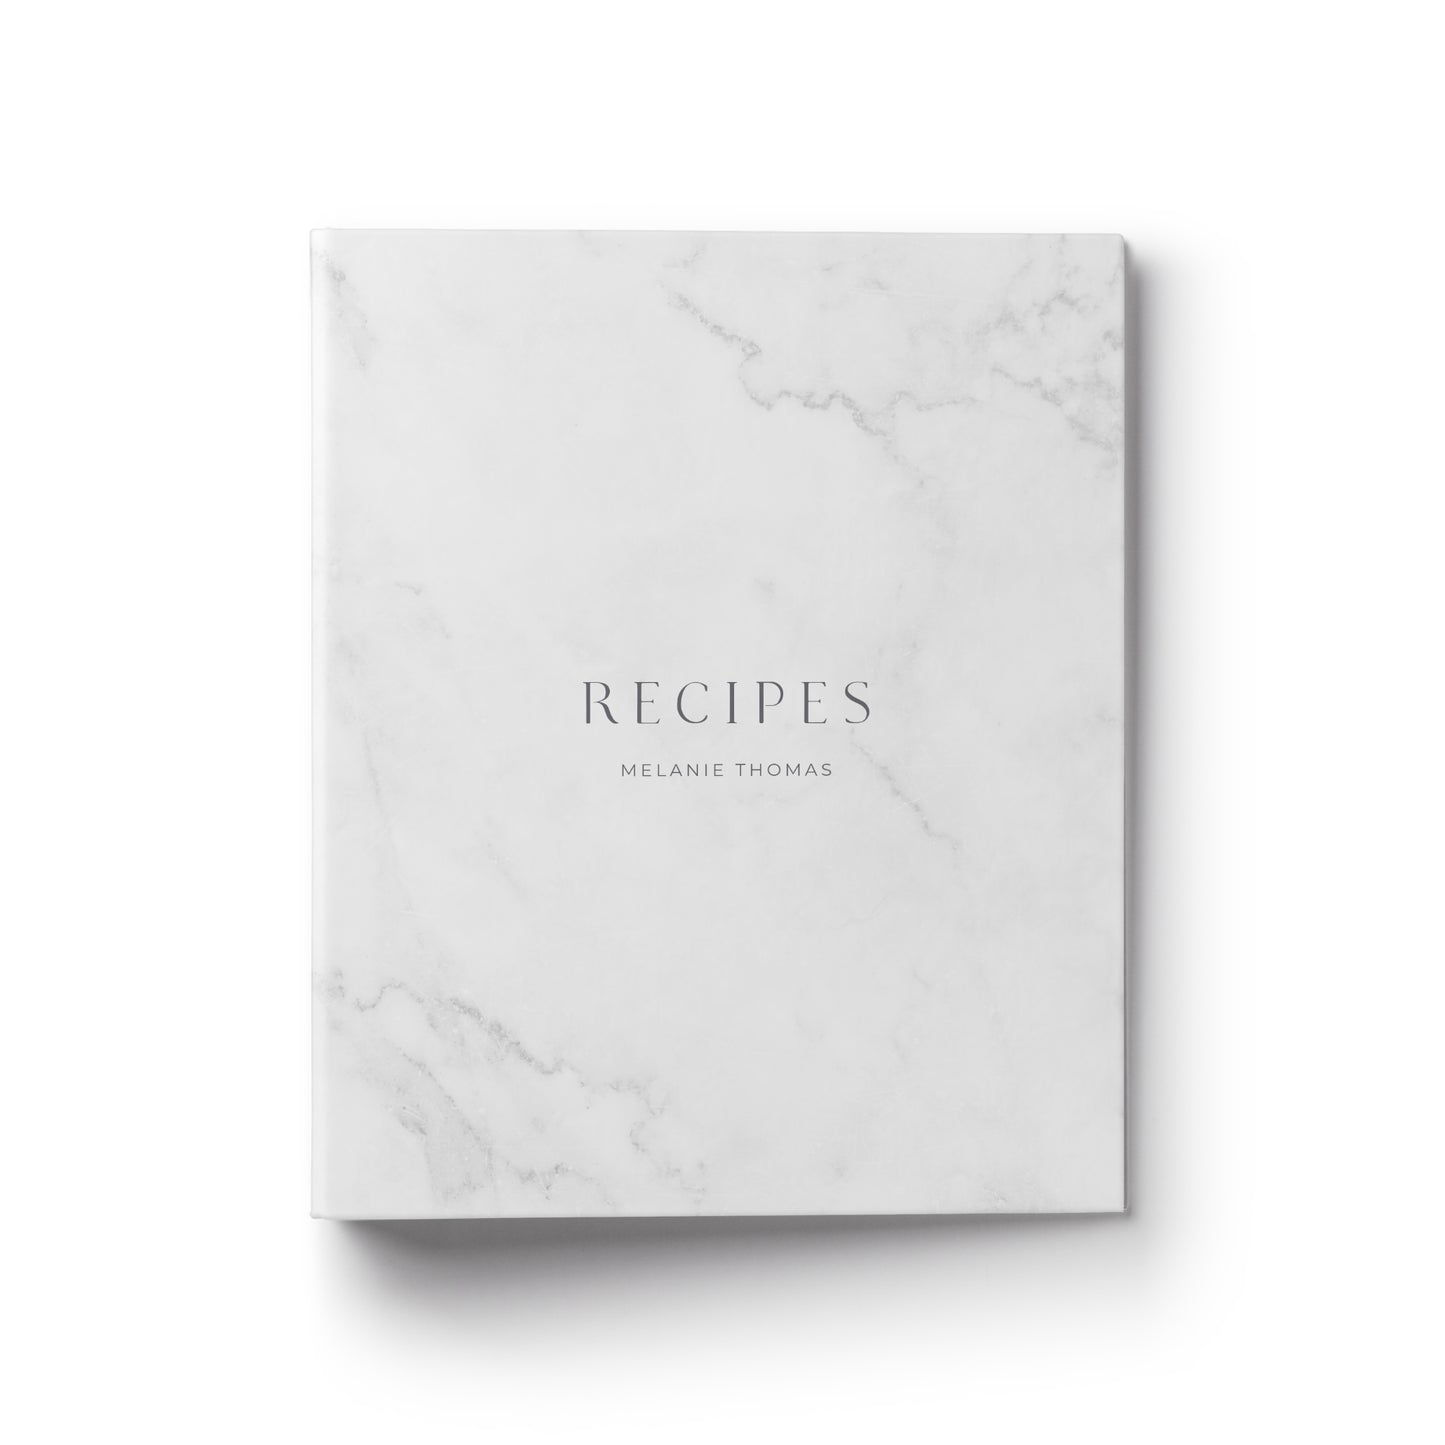 A modern custom recipe binder in a marble printmakes the perfect gift for any occasion